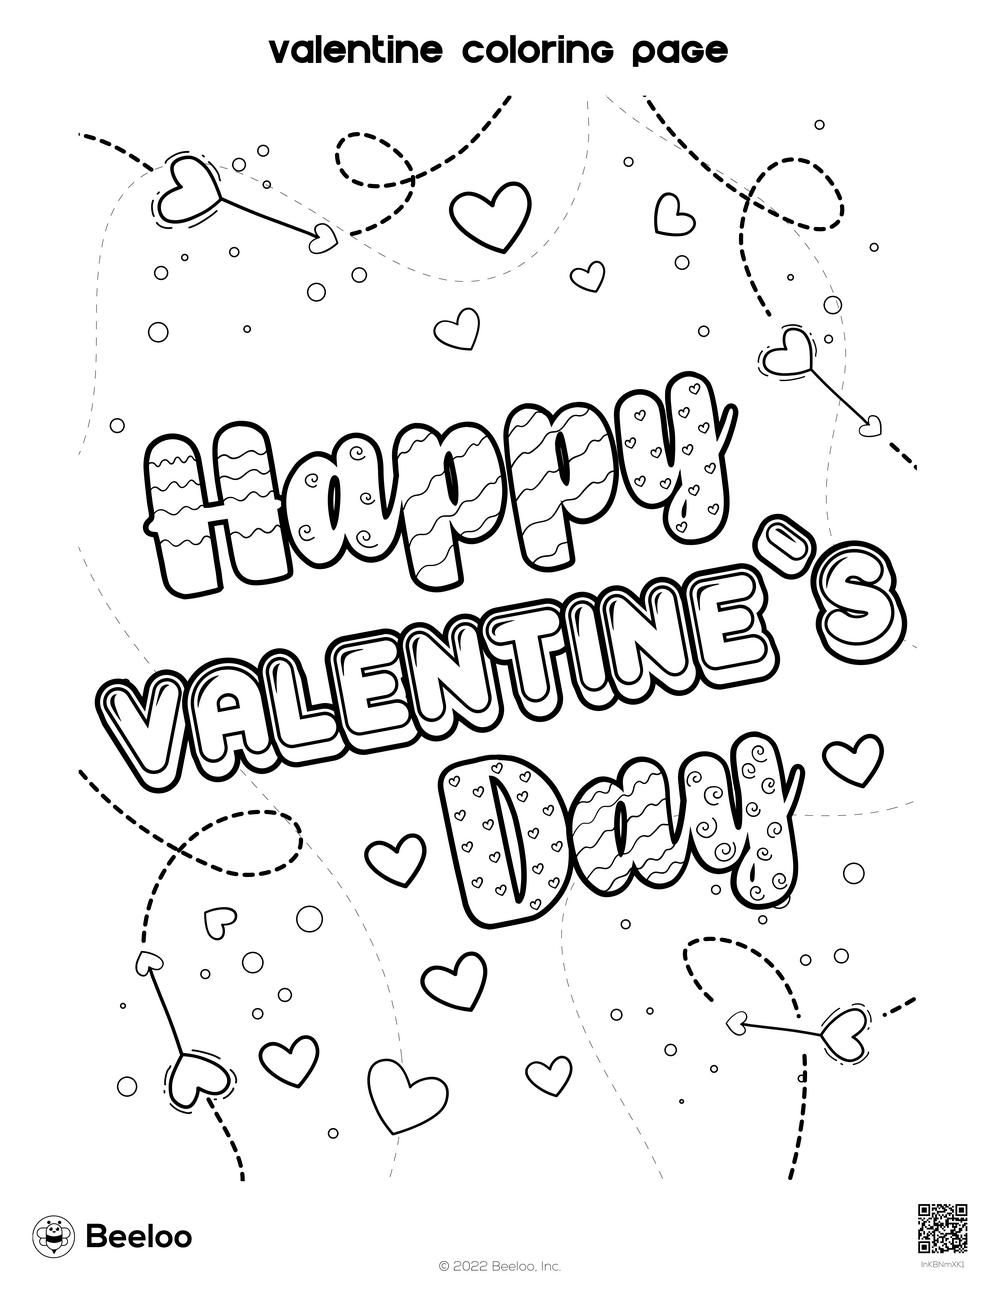 Valentine coloring page â printable crafts and activities for kids